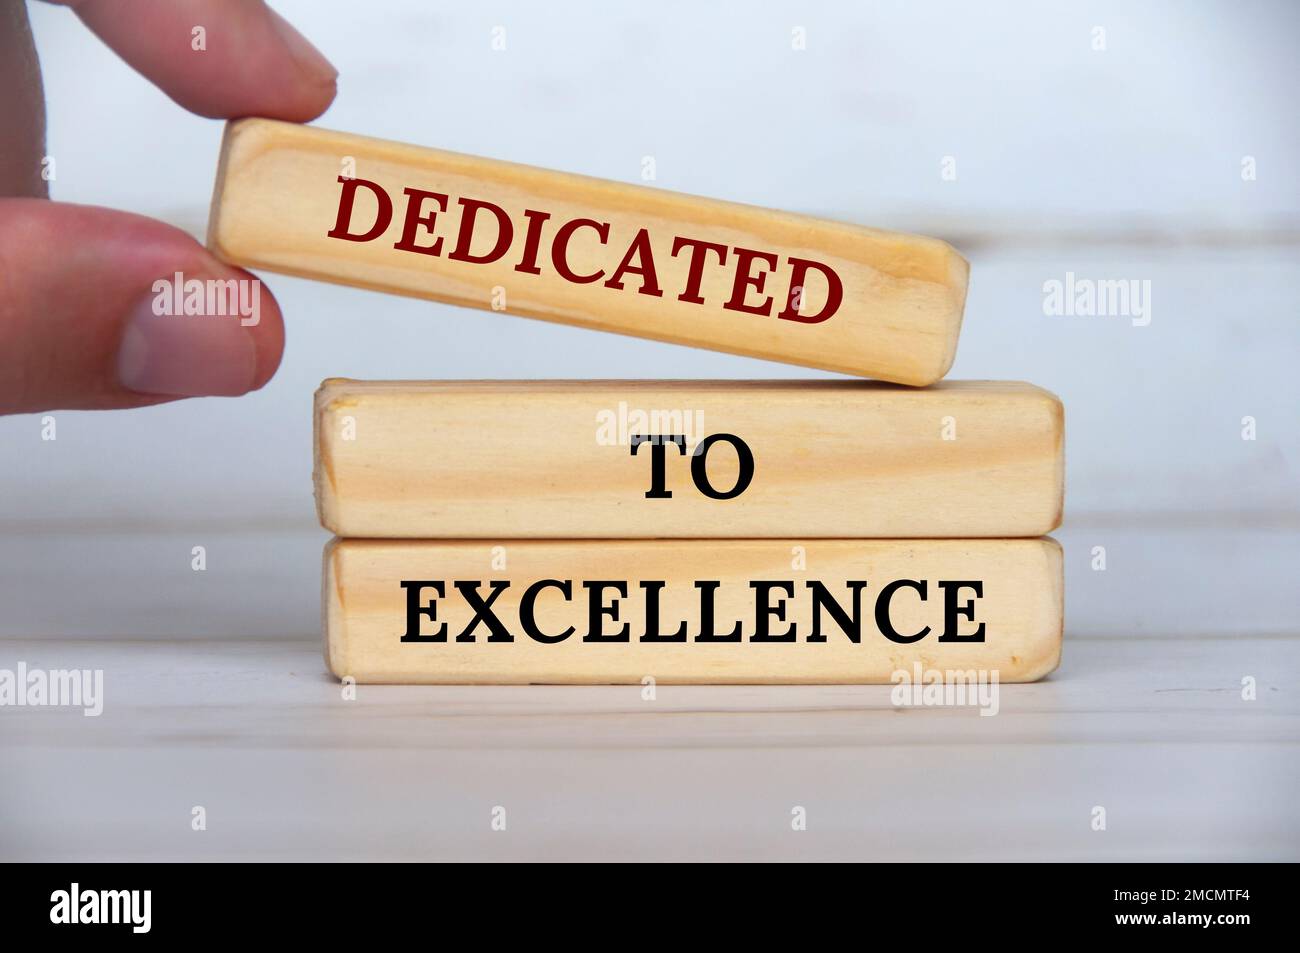 Dedicated to excellence text on wooden blocks with wooden cover background. Business motivation concept. Stock Photo